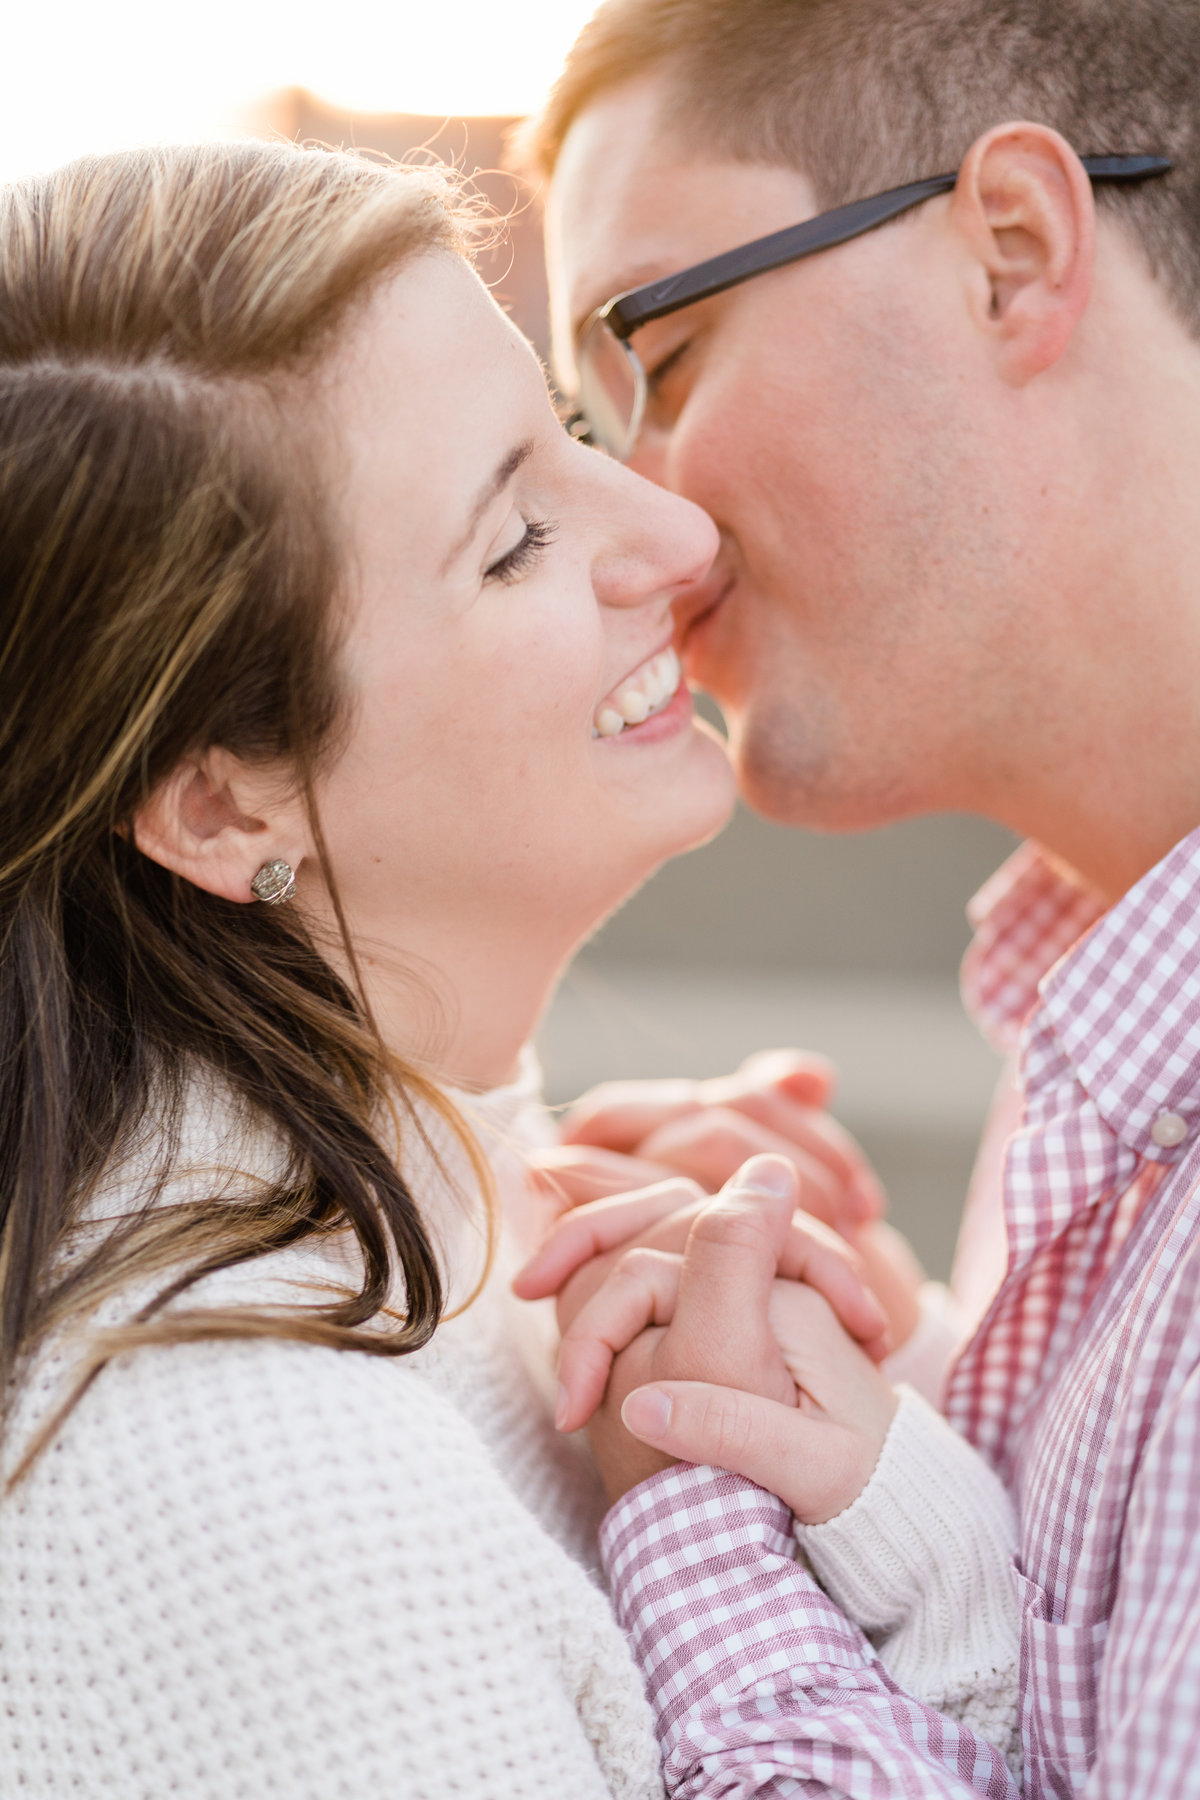 Couple smiling at each other during engagement photoshoot